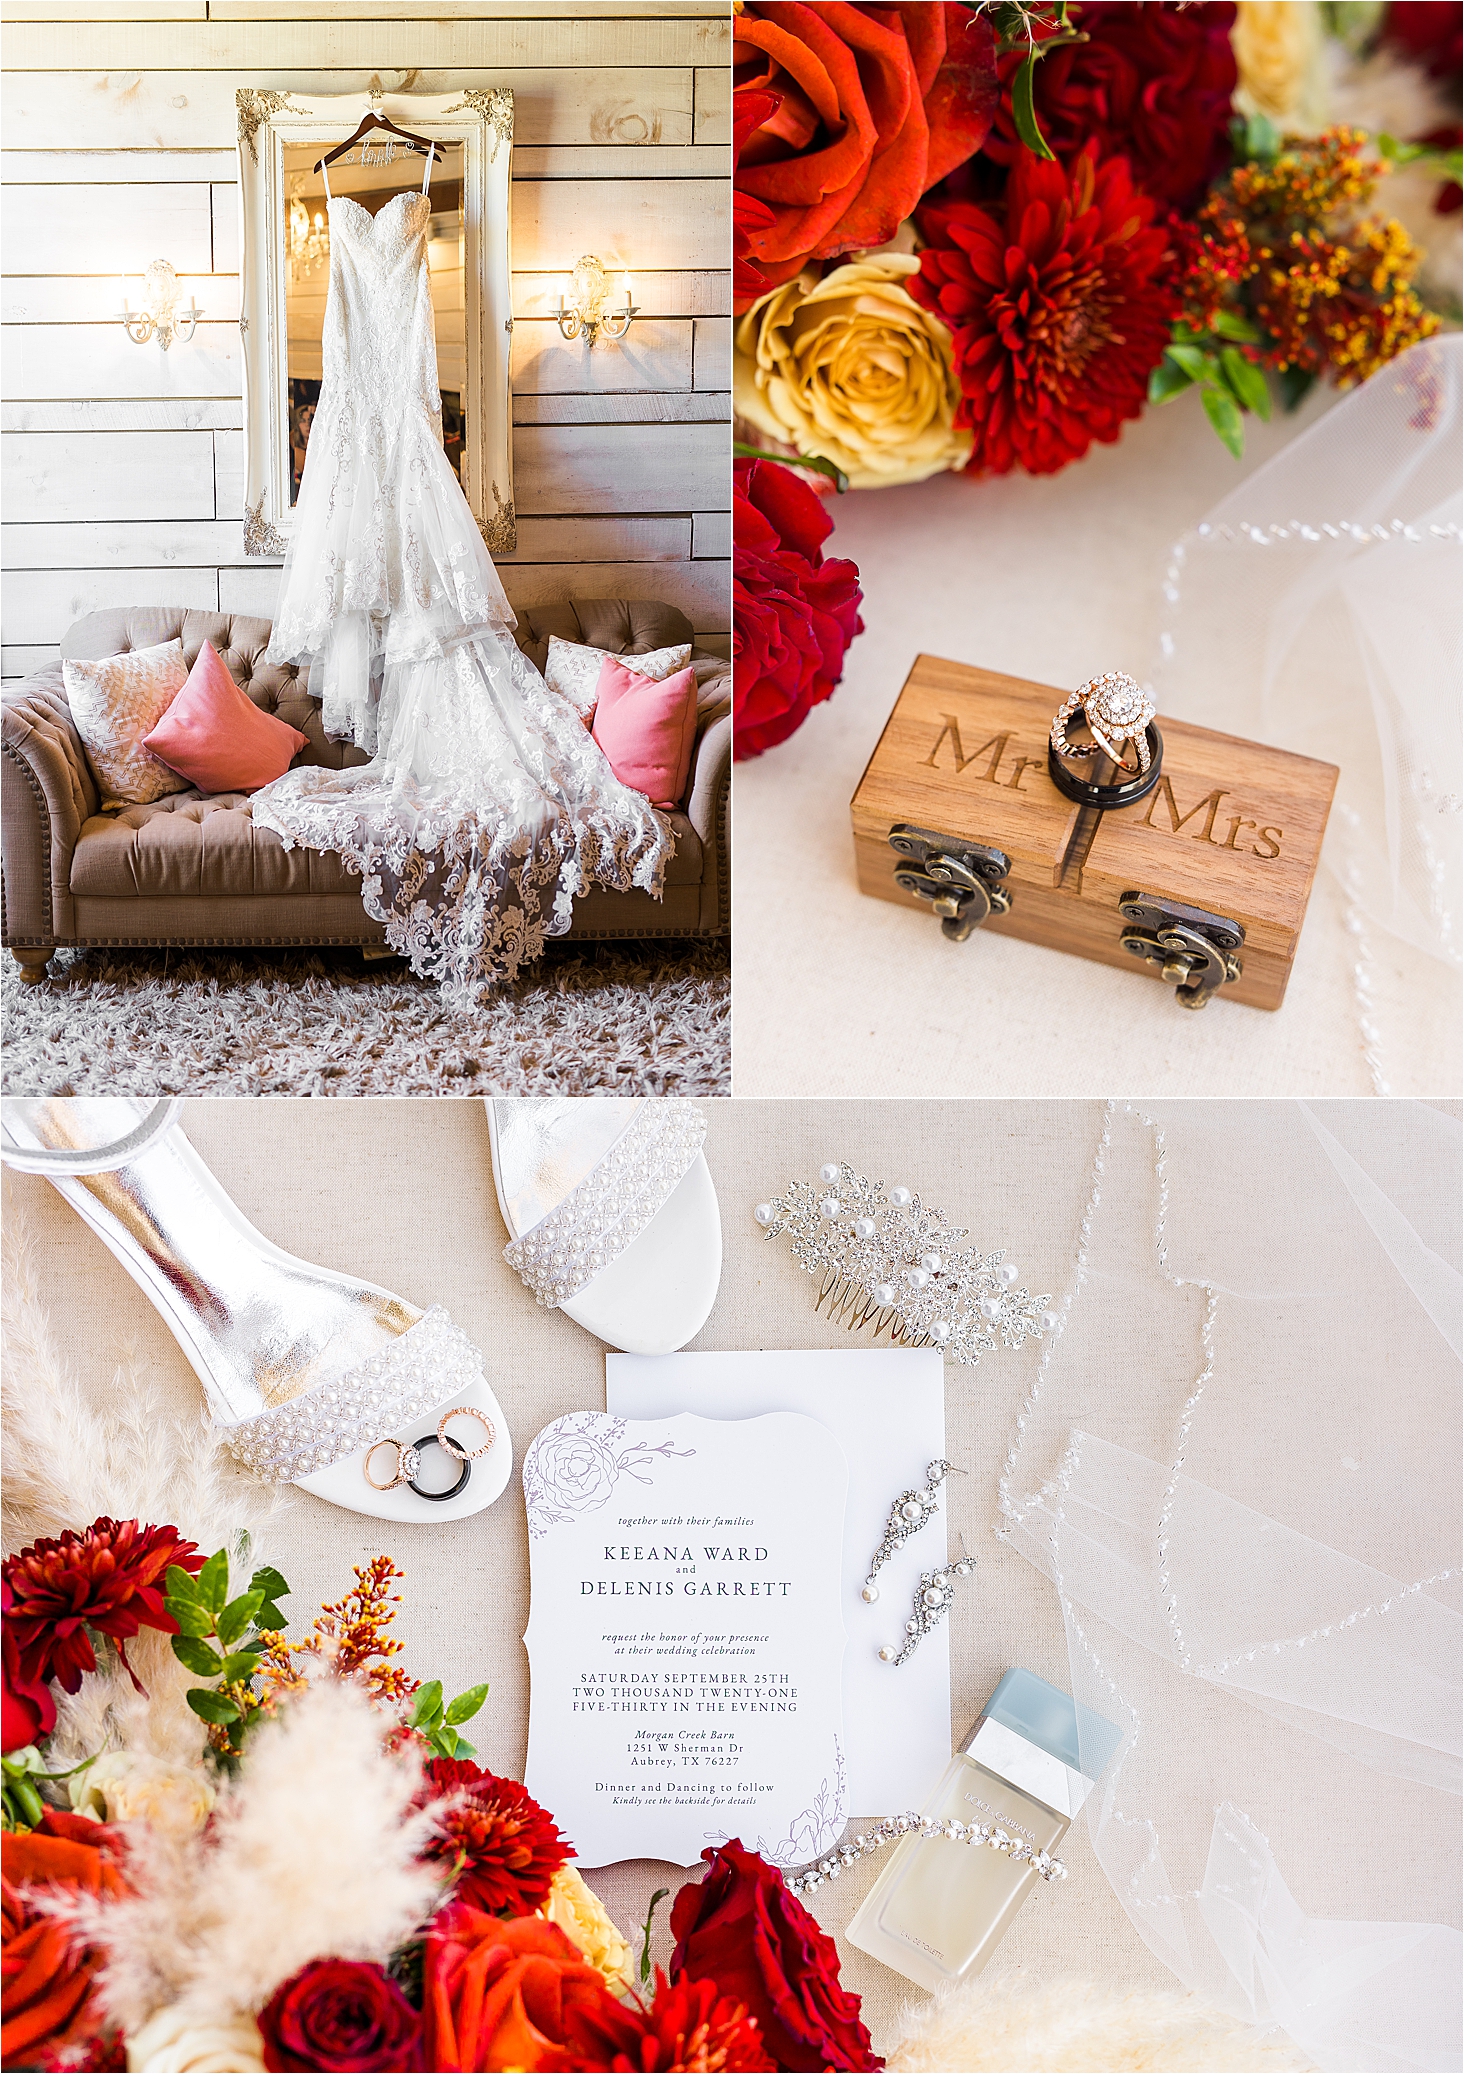 Bridal details including an invitation, ring and flowers at The Milestone by Boerne Texas Wedding Photographer Jillian Hogan